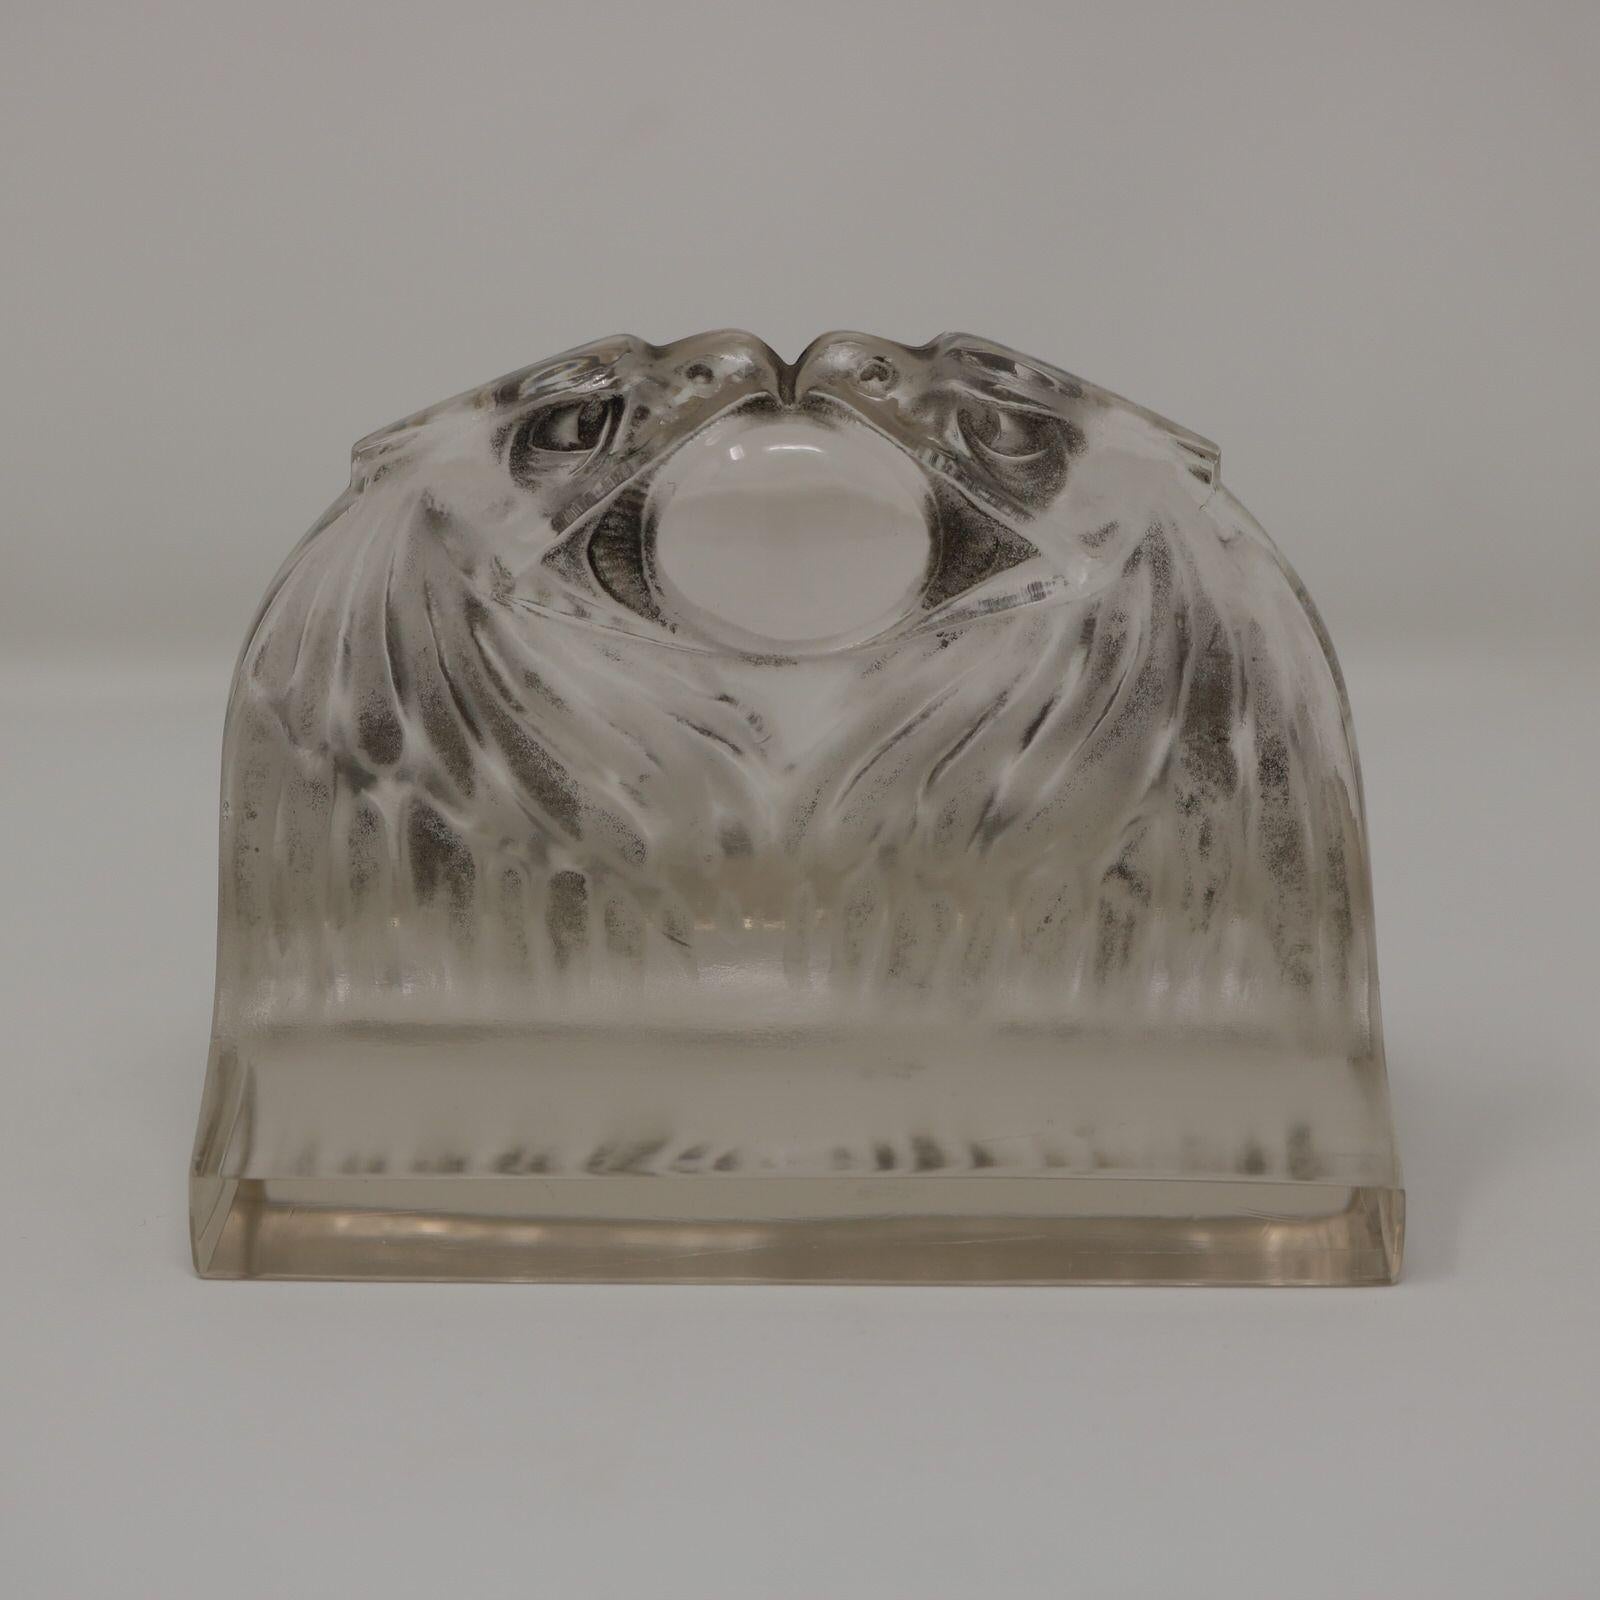 Rene Lalique clear & frosted glass 'Deux Aigles' paperweight, with details highlighted in grey staining. Features two eagle heads facing each other with a ball in their beaks. Moulded makers mark, 'R. LALIQUE', to side of base. Book reference: 'R.